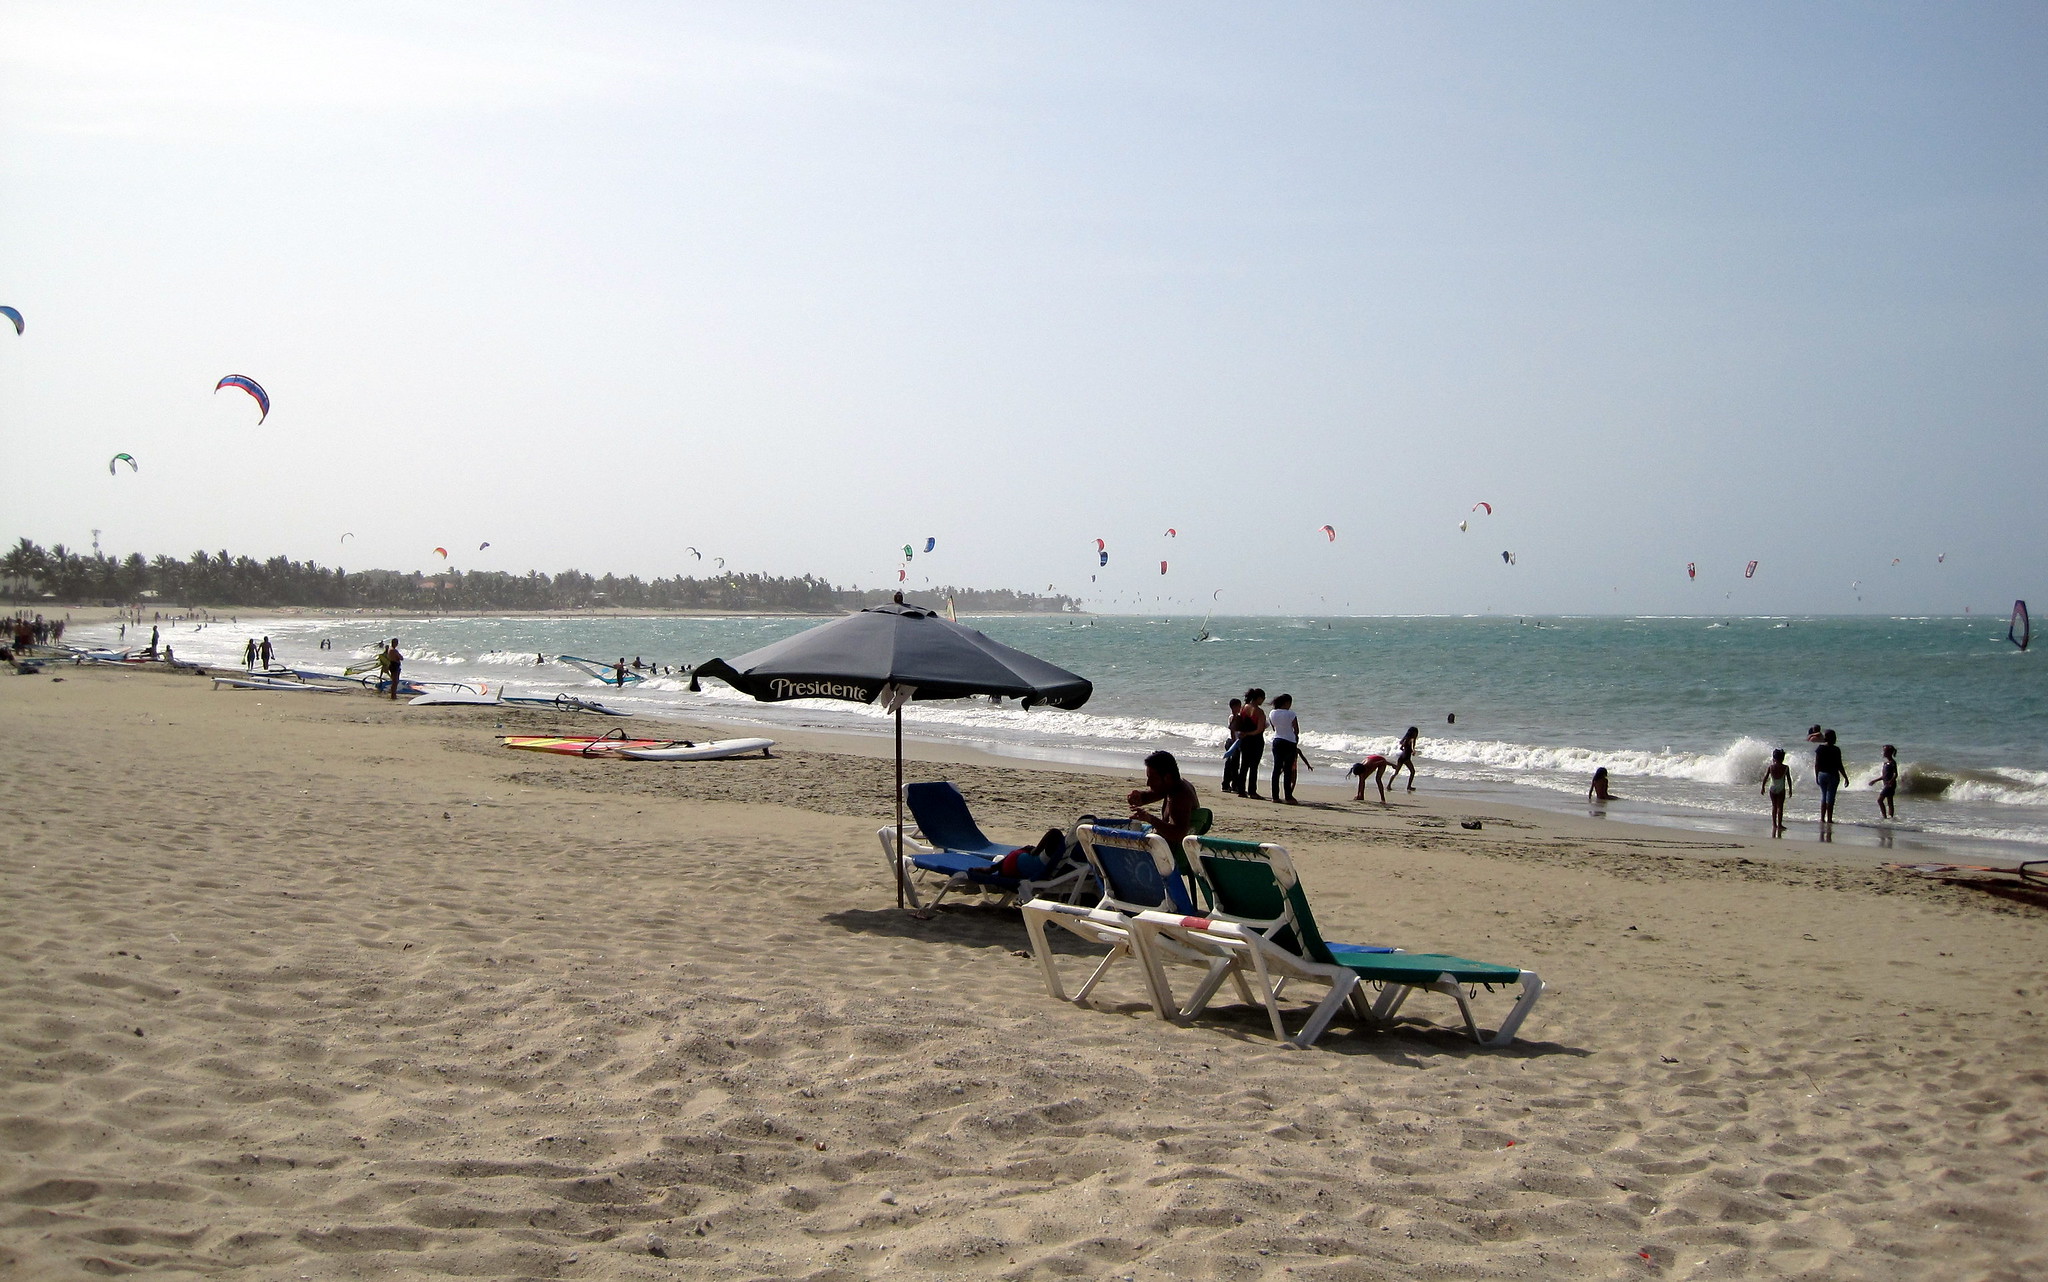 Tourist enjoying a hot sunny day at Playa Cabarete in Cabarete, one of the best beaches in the Dominican Republic, with a number of kitesurfers offshore